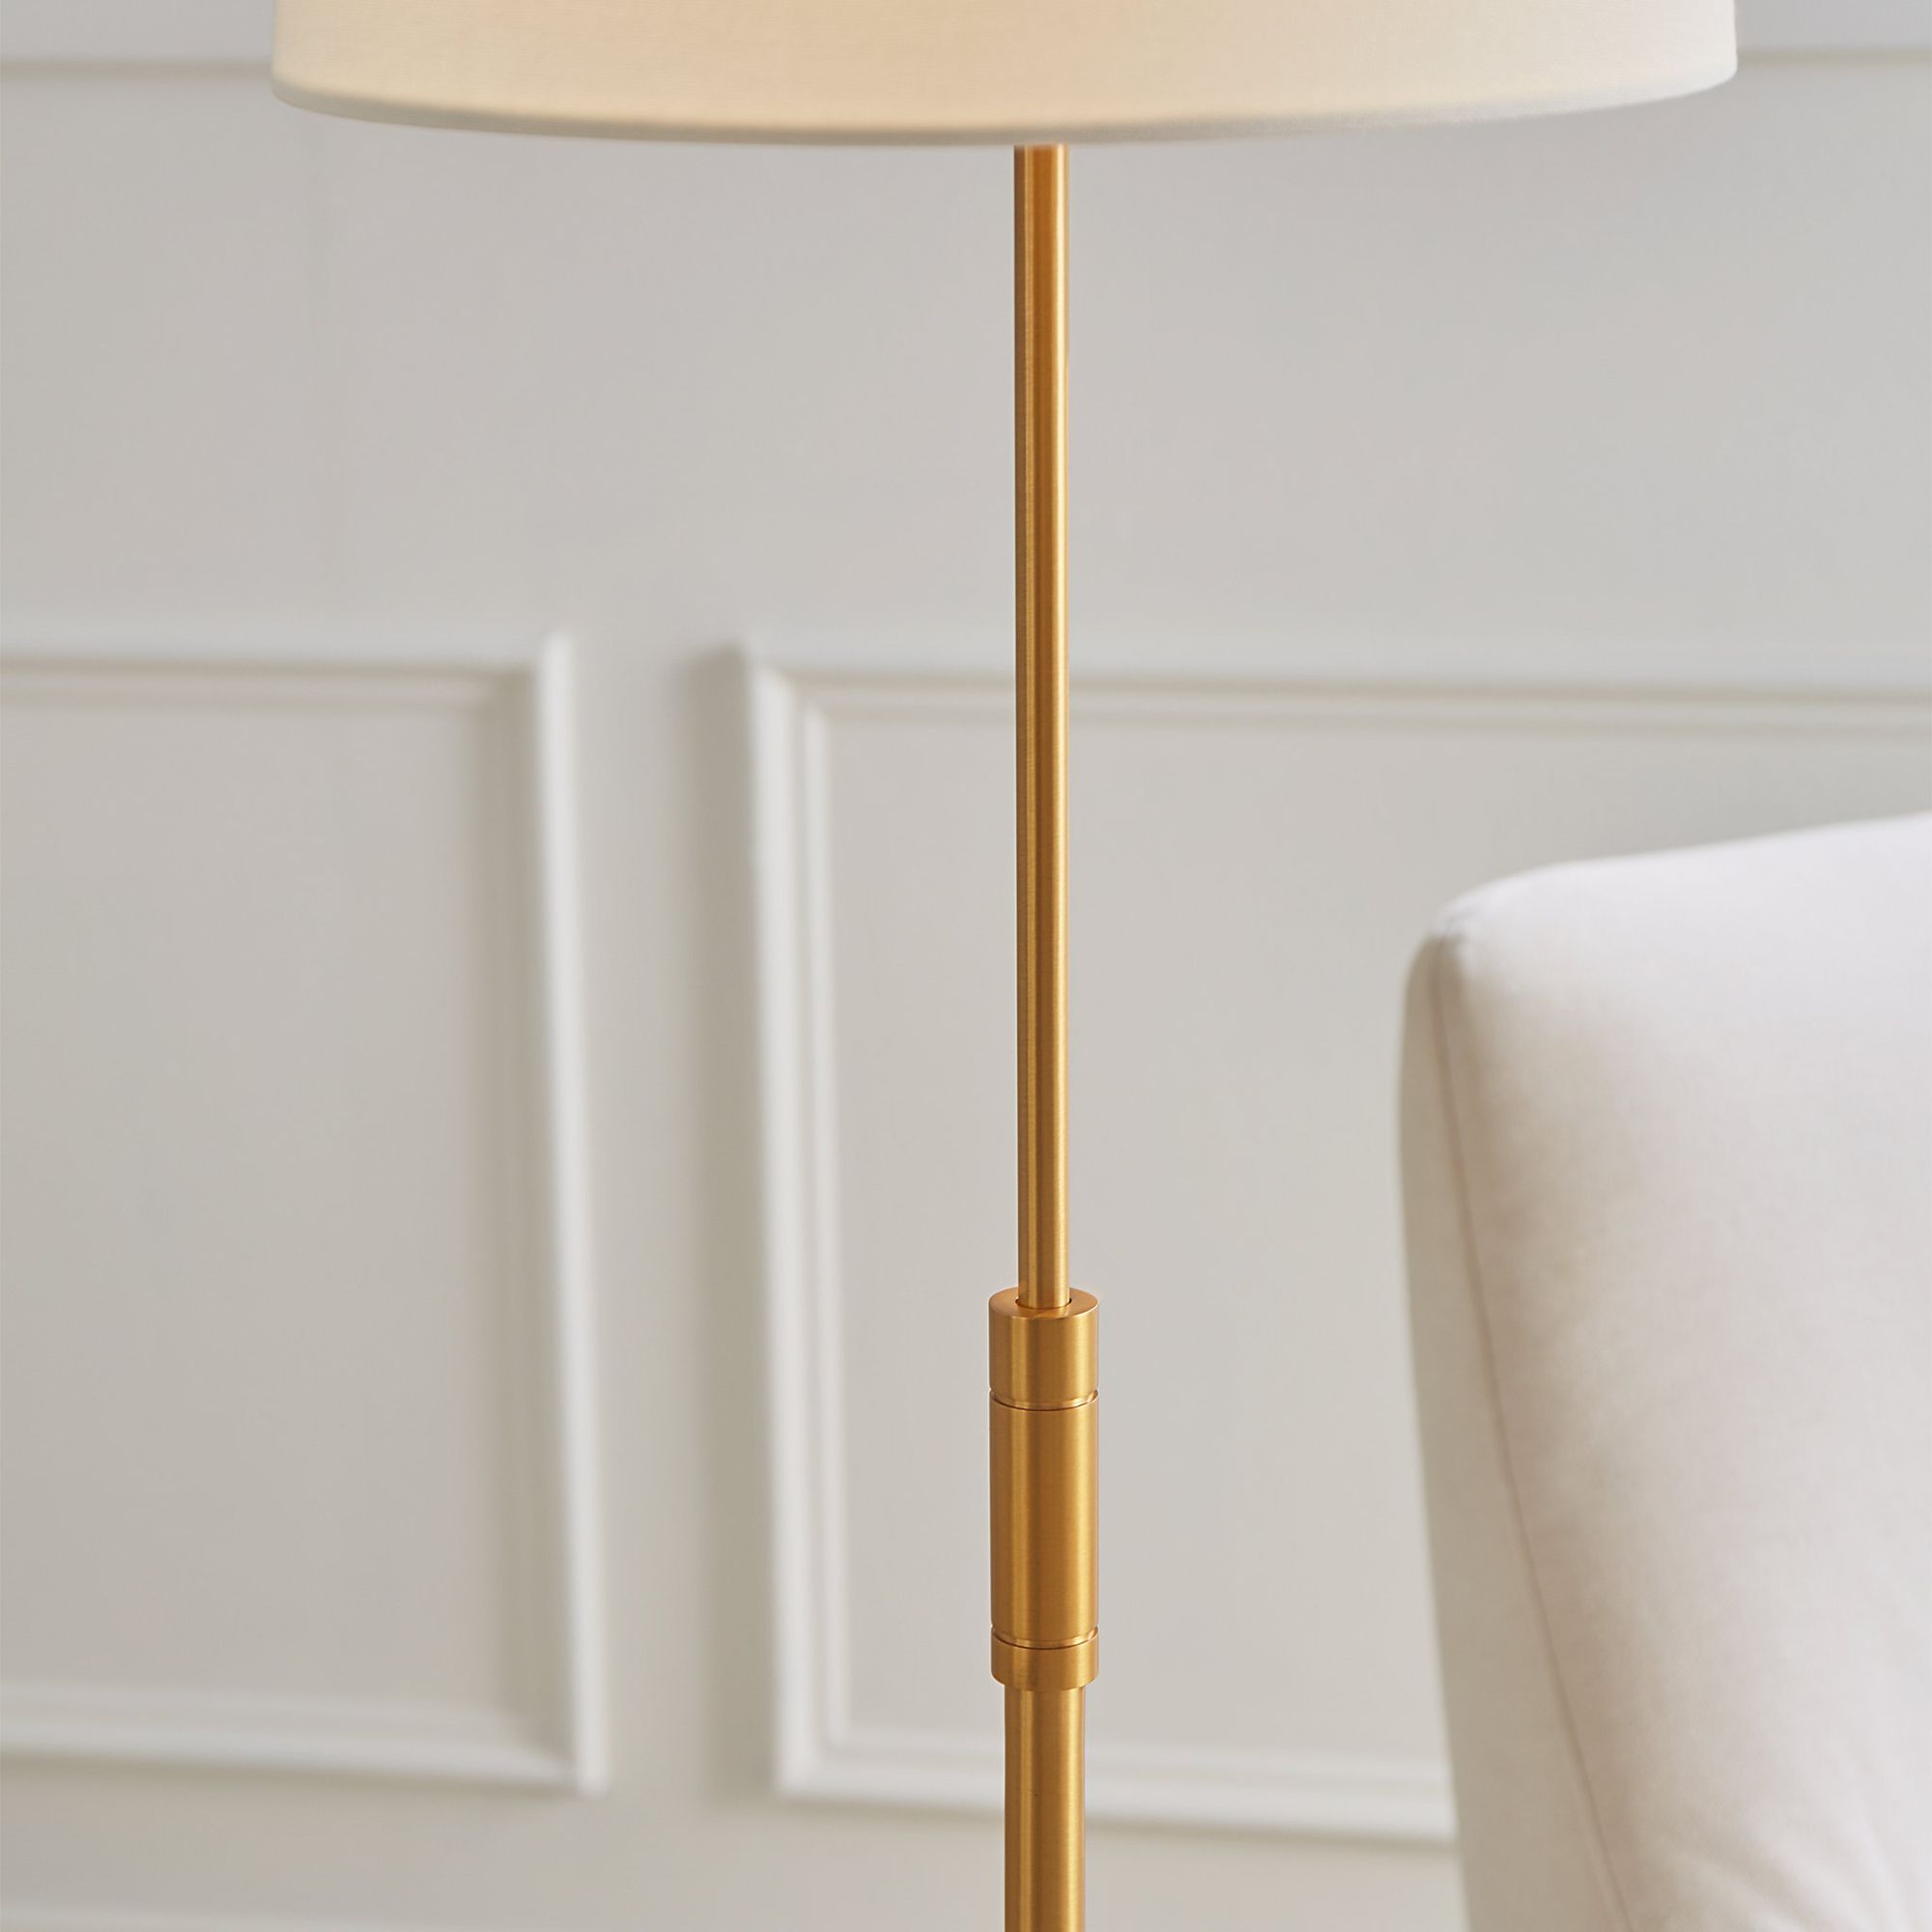 Thomas O'Brien Beckham Classic Floor Lamp in Burnished Brass